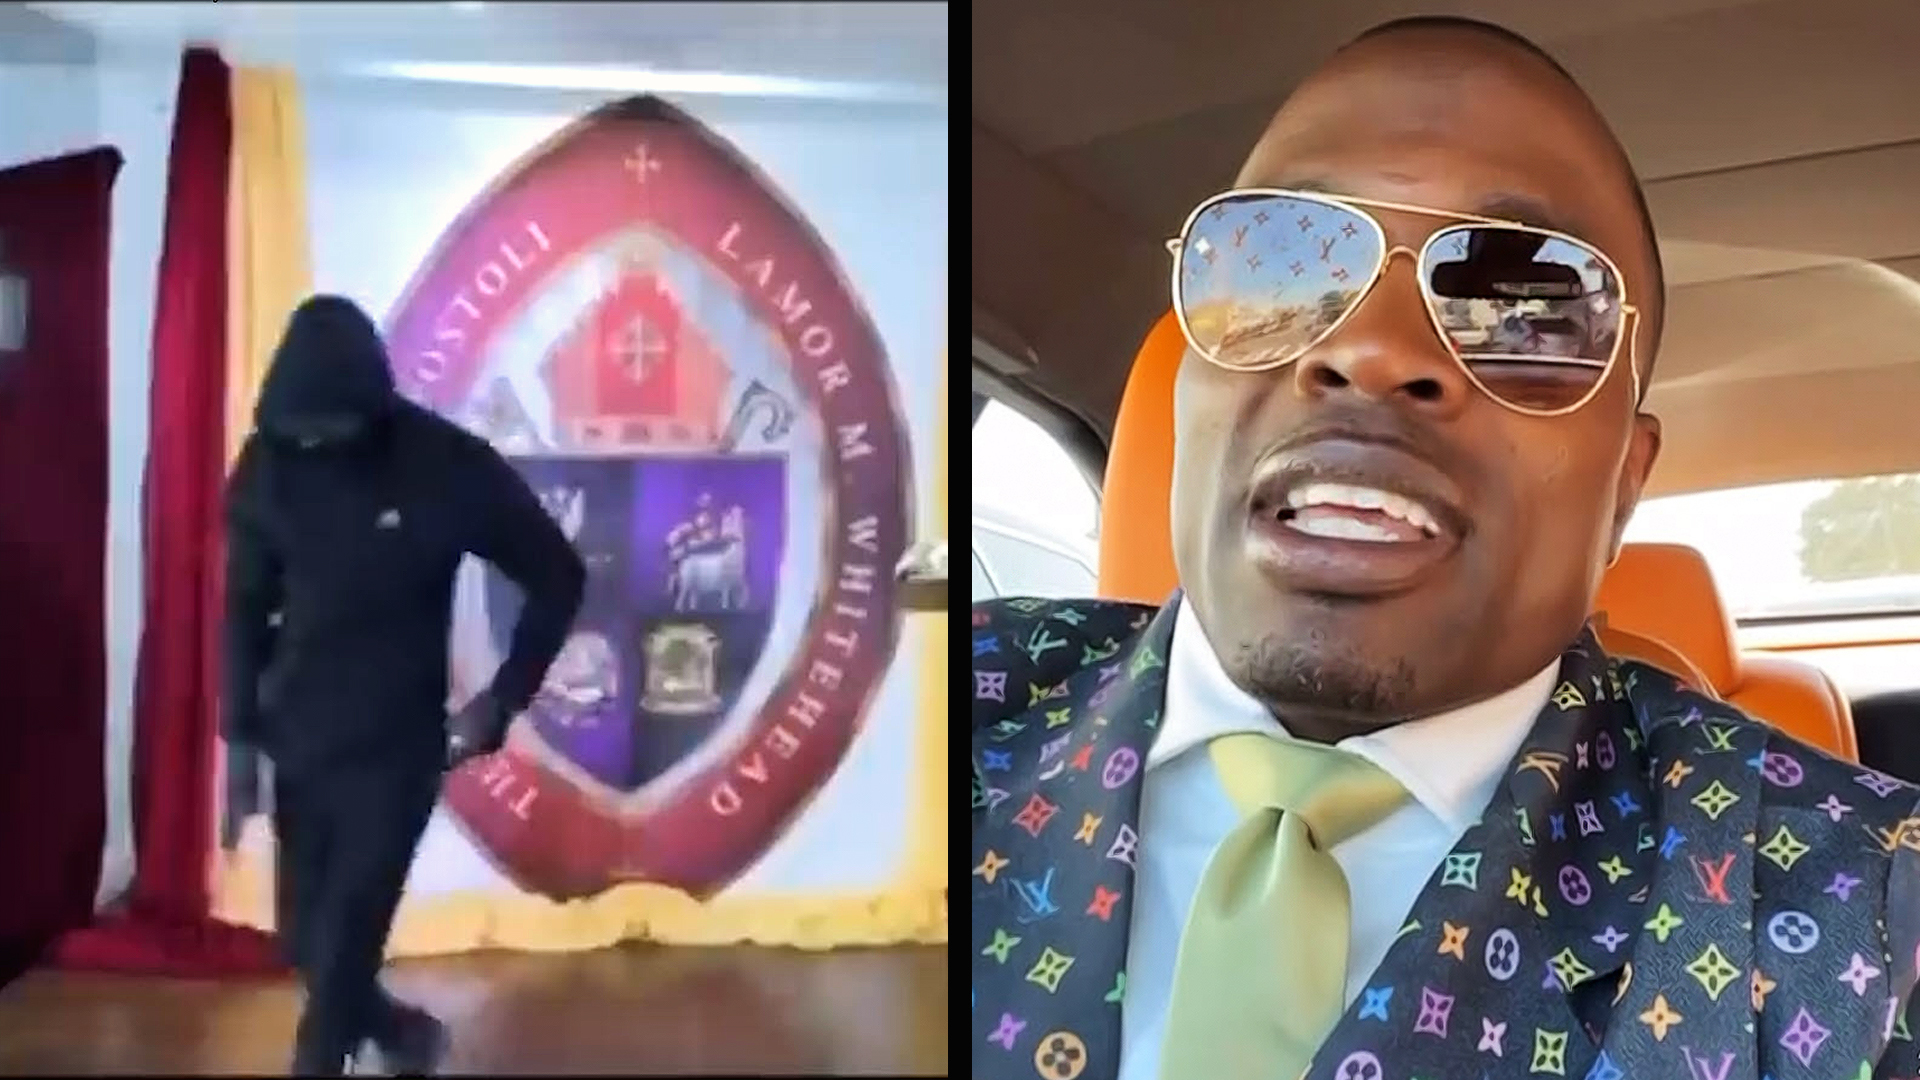 (Exclusive) NYC Bishop Robbed During Livestream Balks At Accusations He Was In On Heist, Defends Flashy Lifestyle